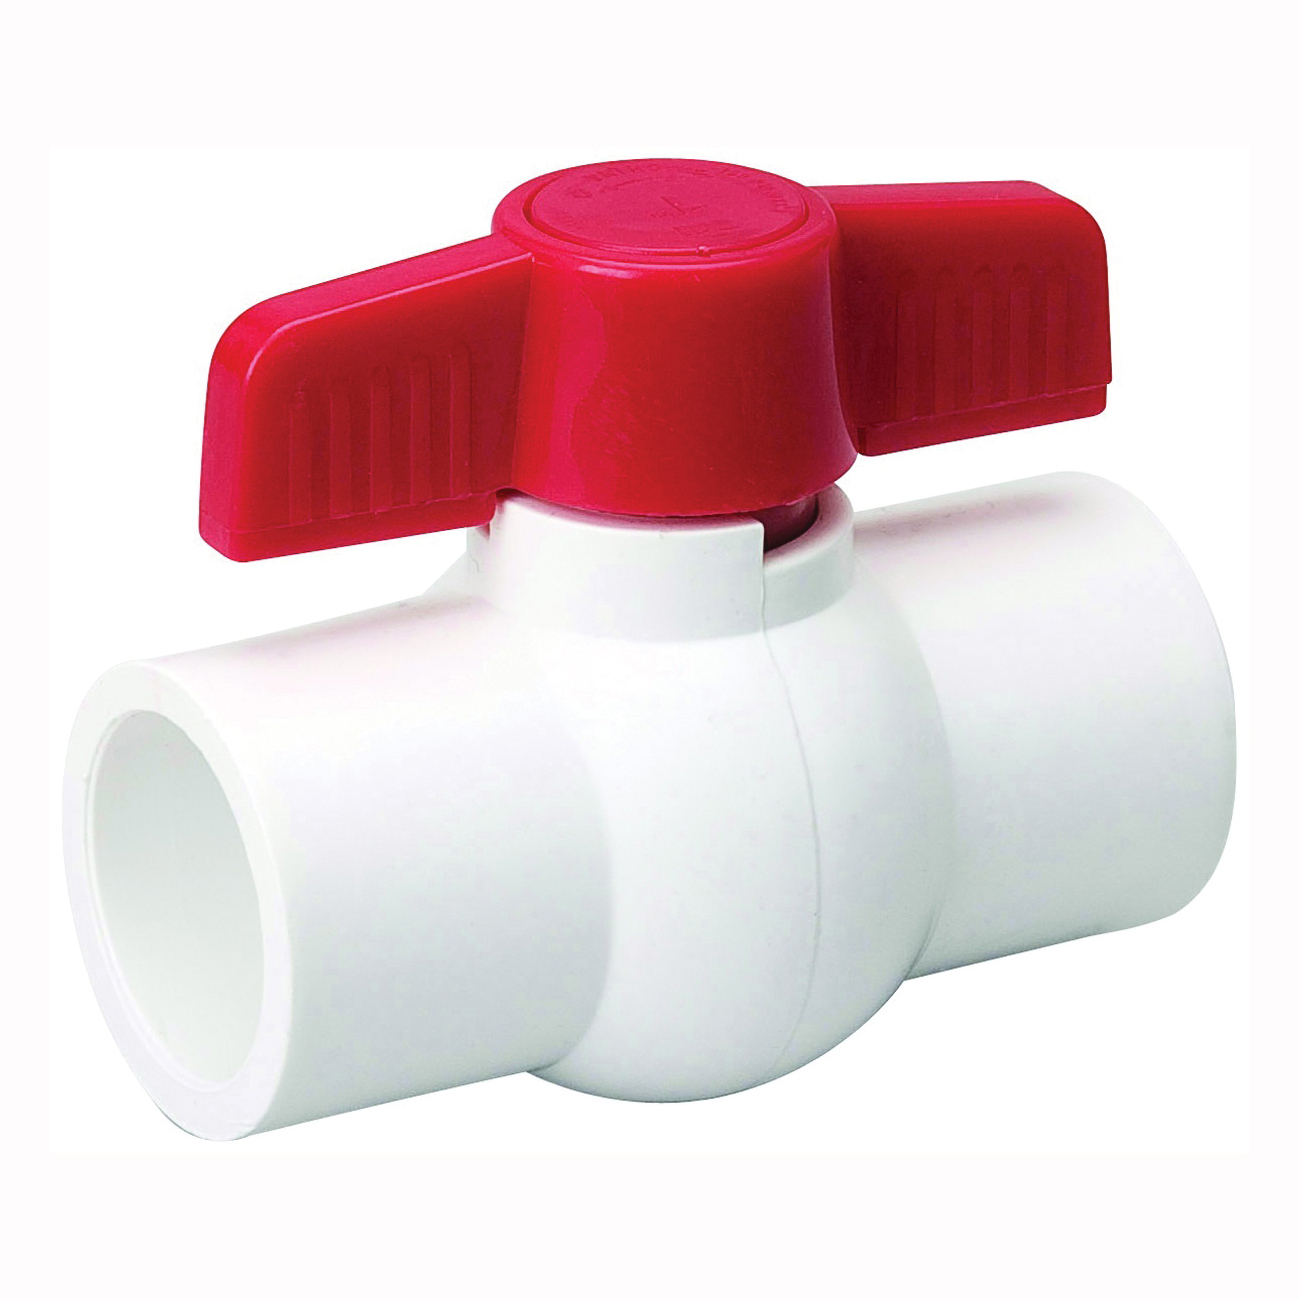 107-635HC Ball Valve, 1 in Connection, Compression, 150 psi Pressure, Manual Actuator, PVC Body